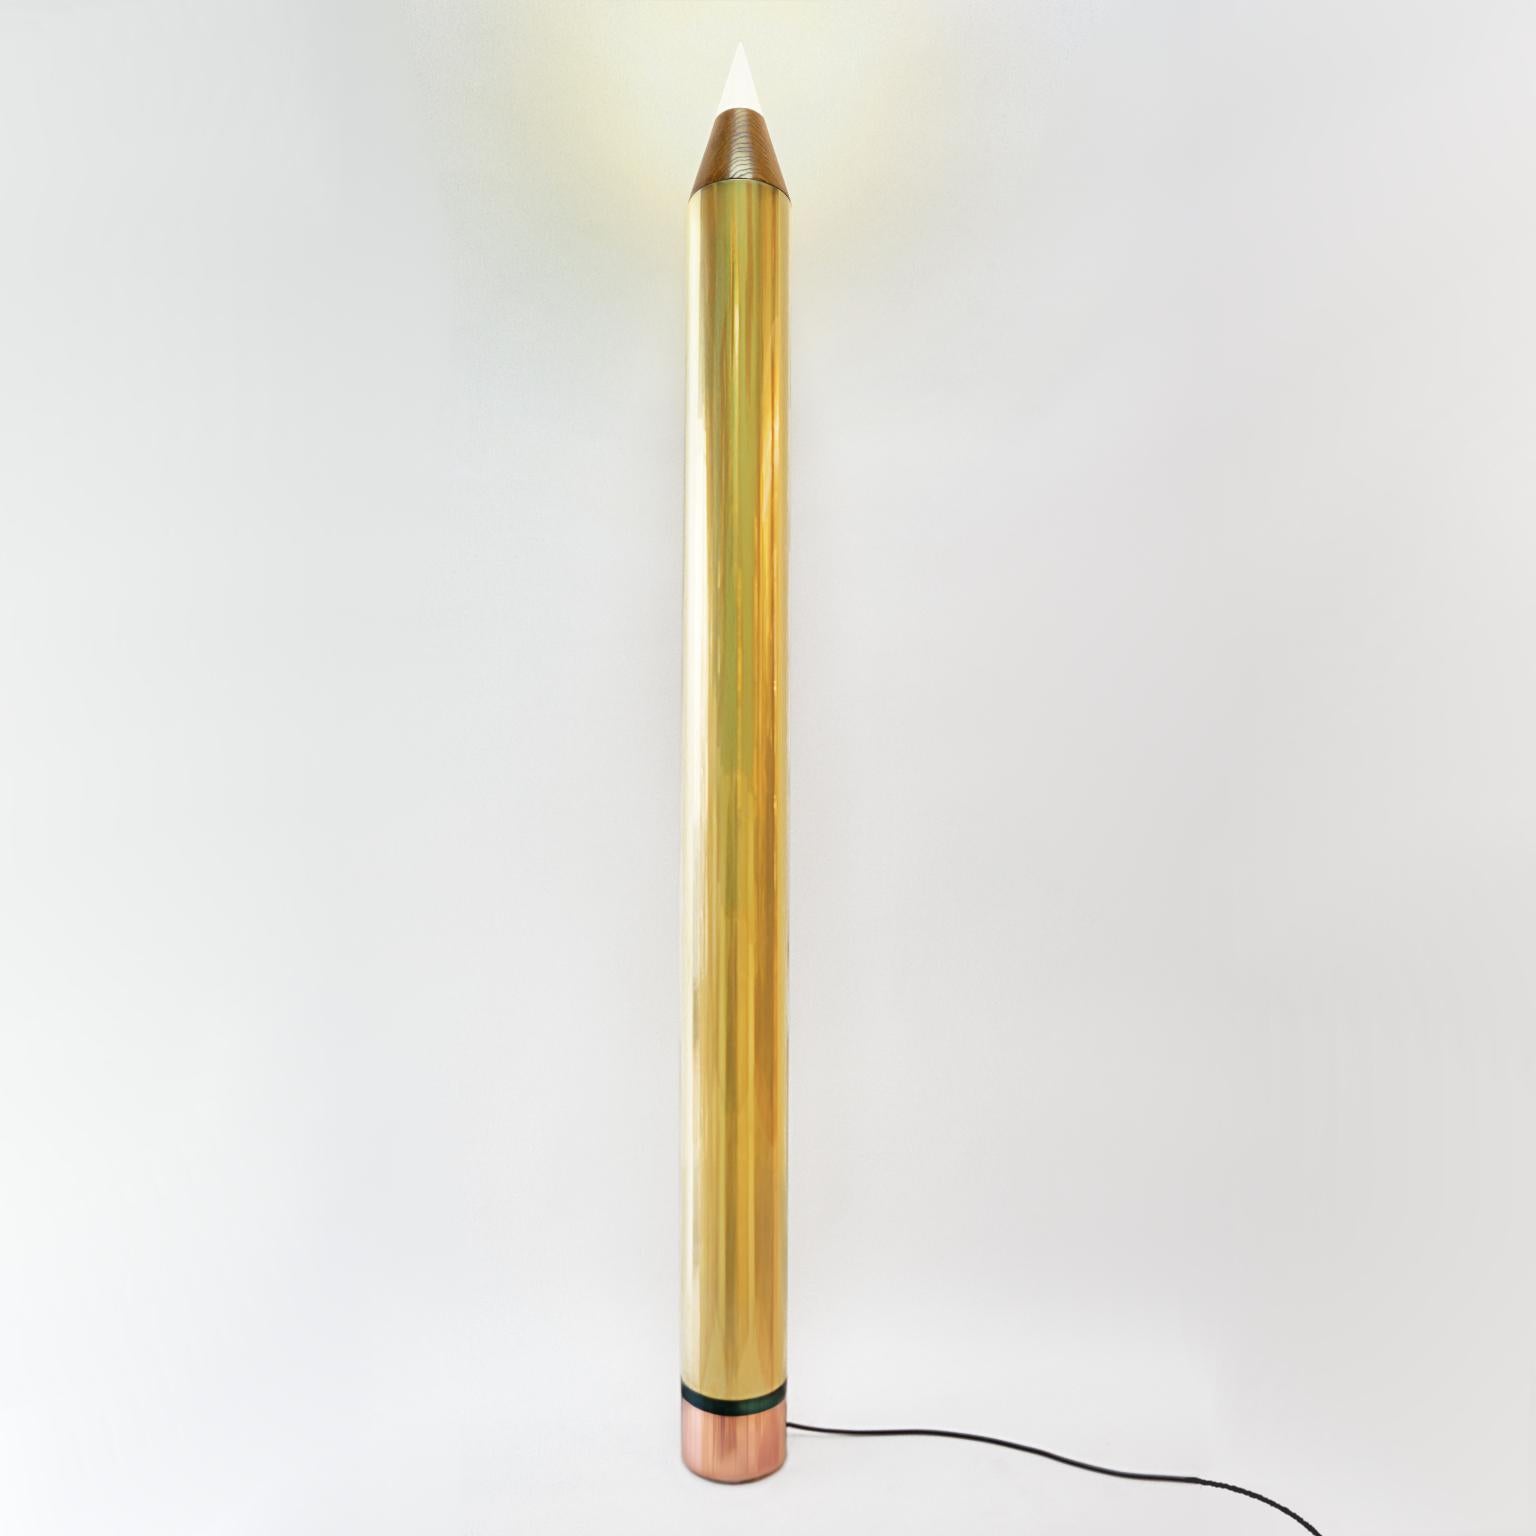 Giotto is the name of this limited edition floor lamp, just like the name of a very important figure who has conceived art beyond belief during his lifetime.

There are only 9 unique pieces, hand-crafted by the designer himself, who 